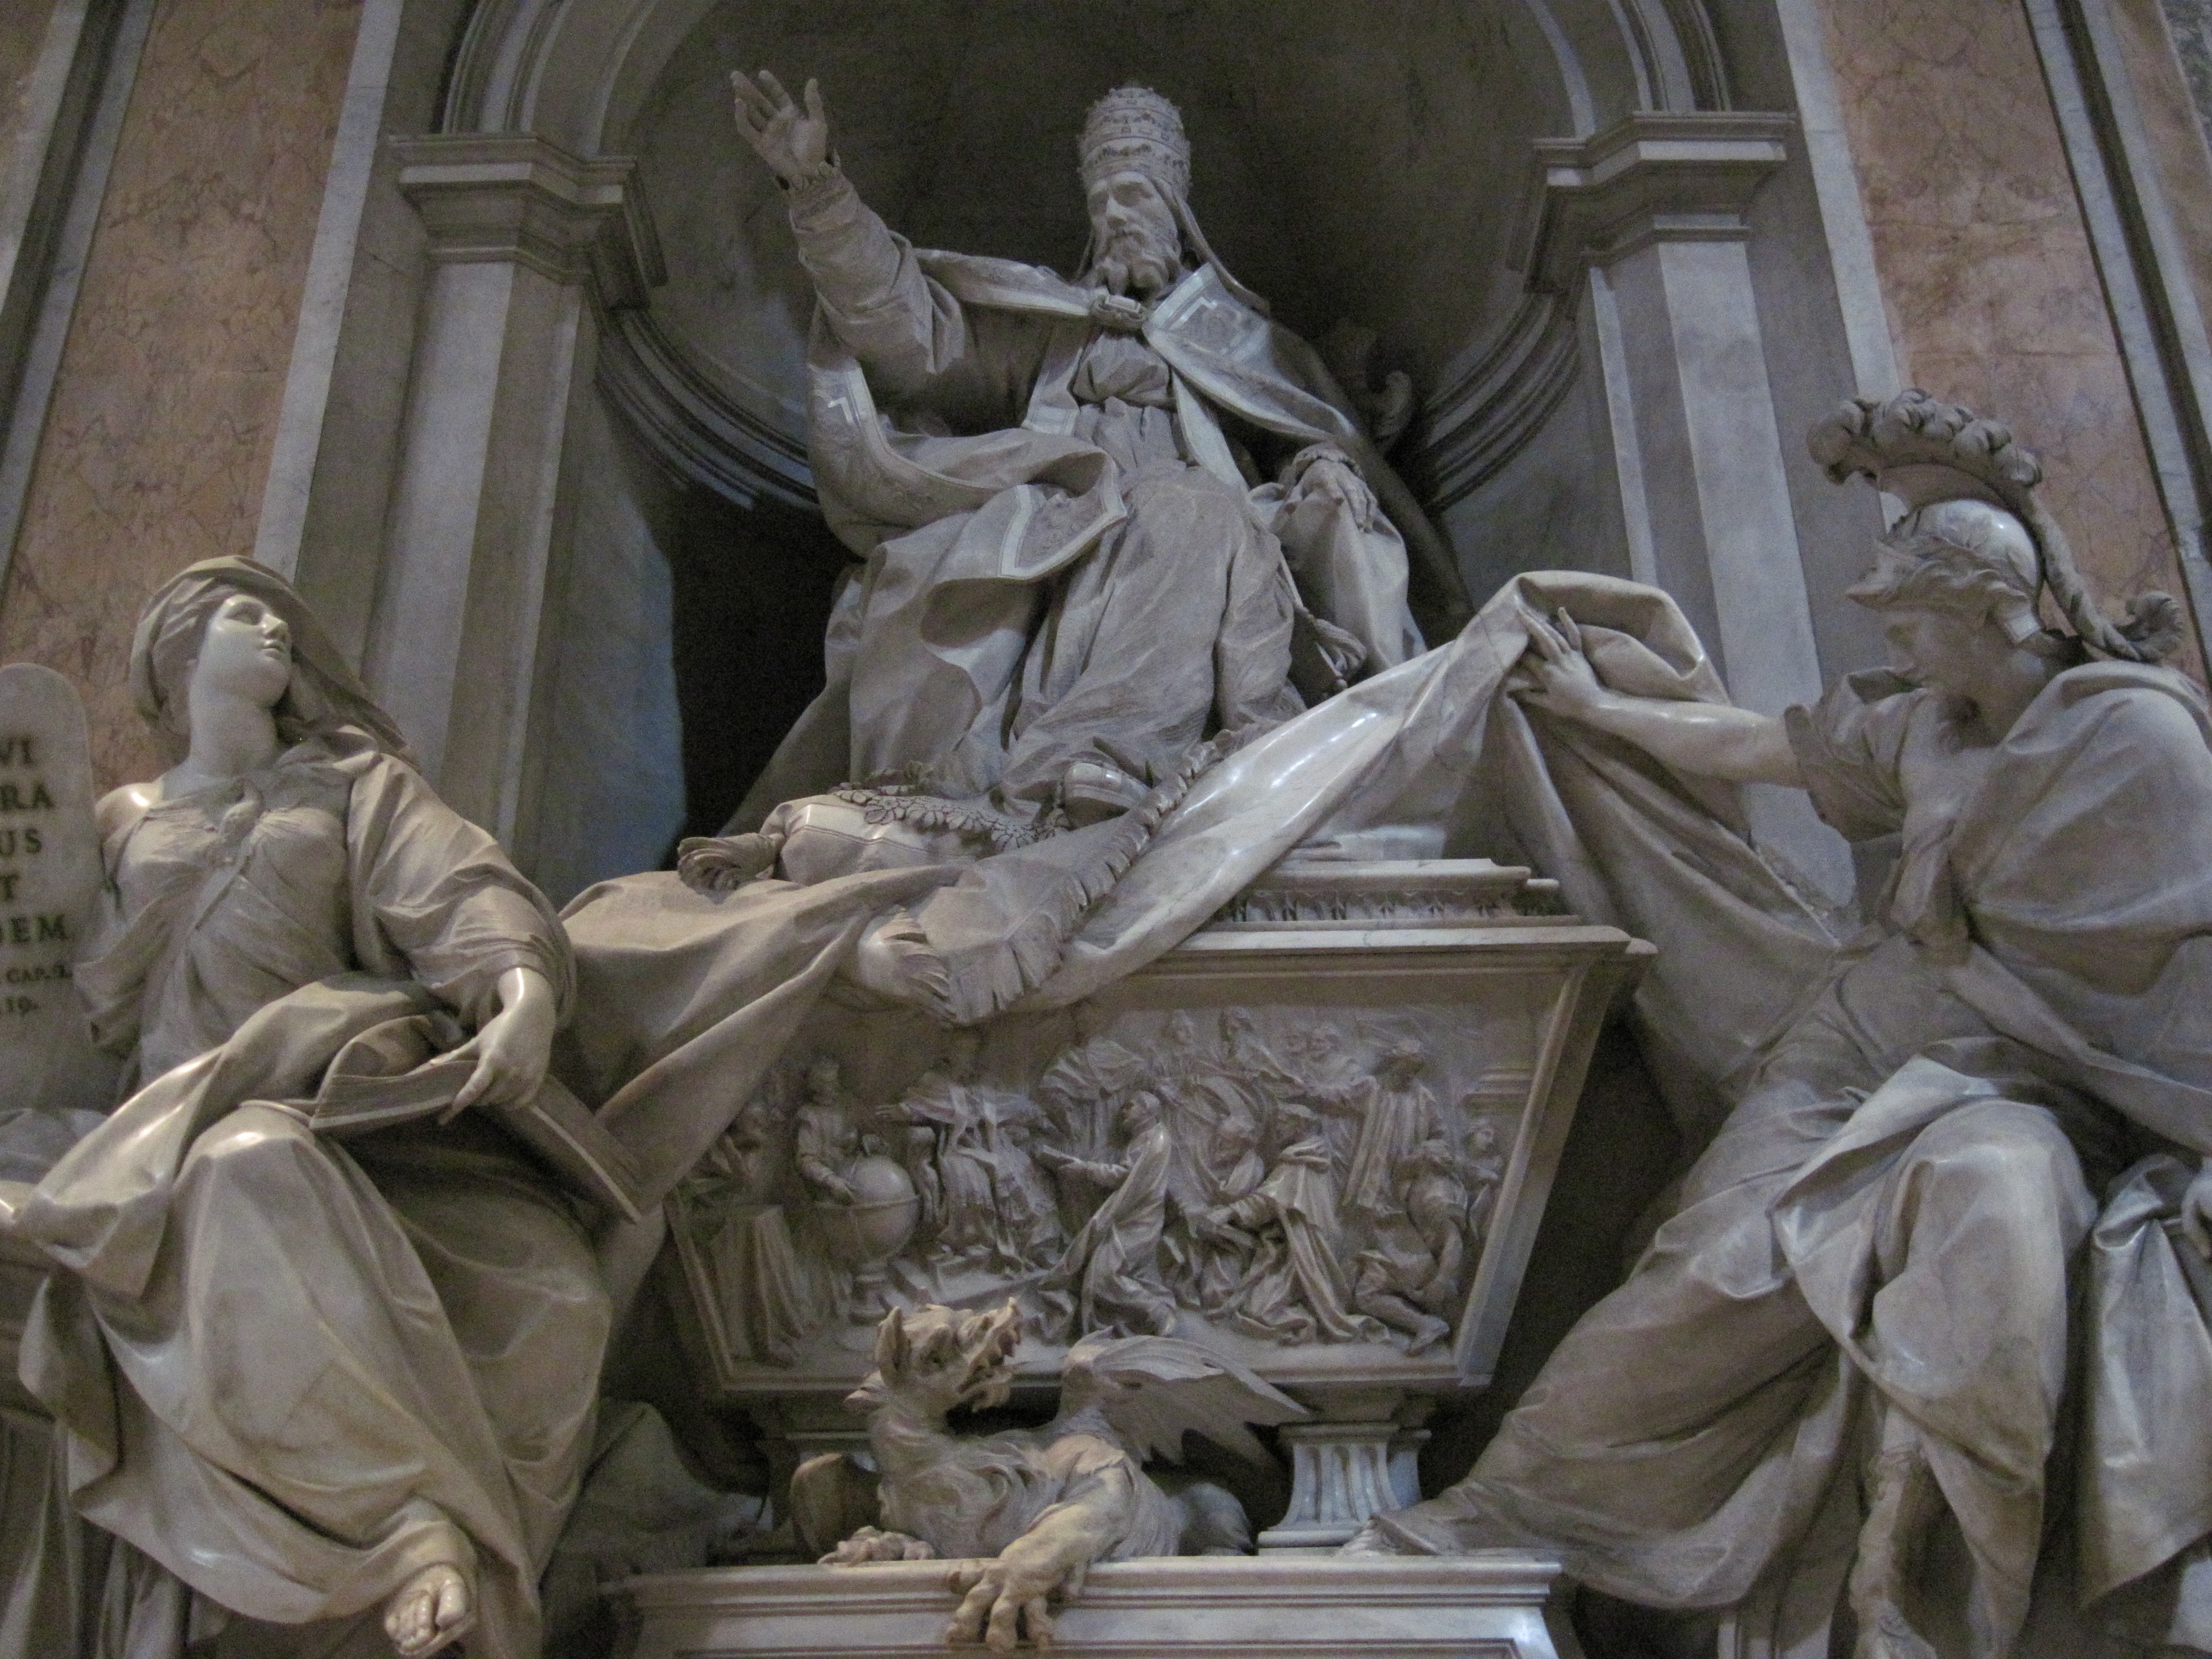 Sculptures in the st. peter's basil photo